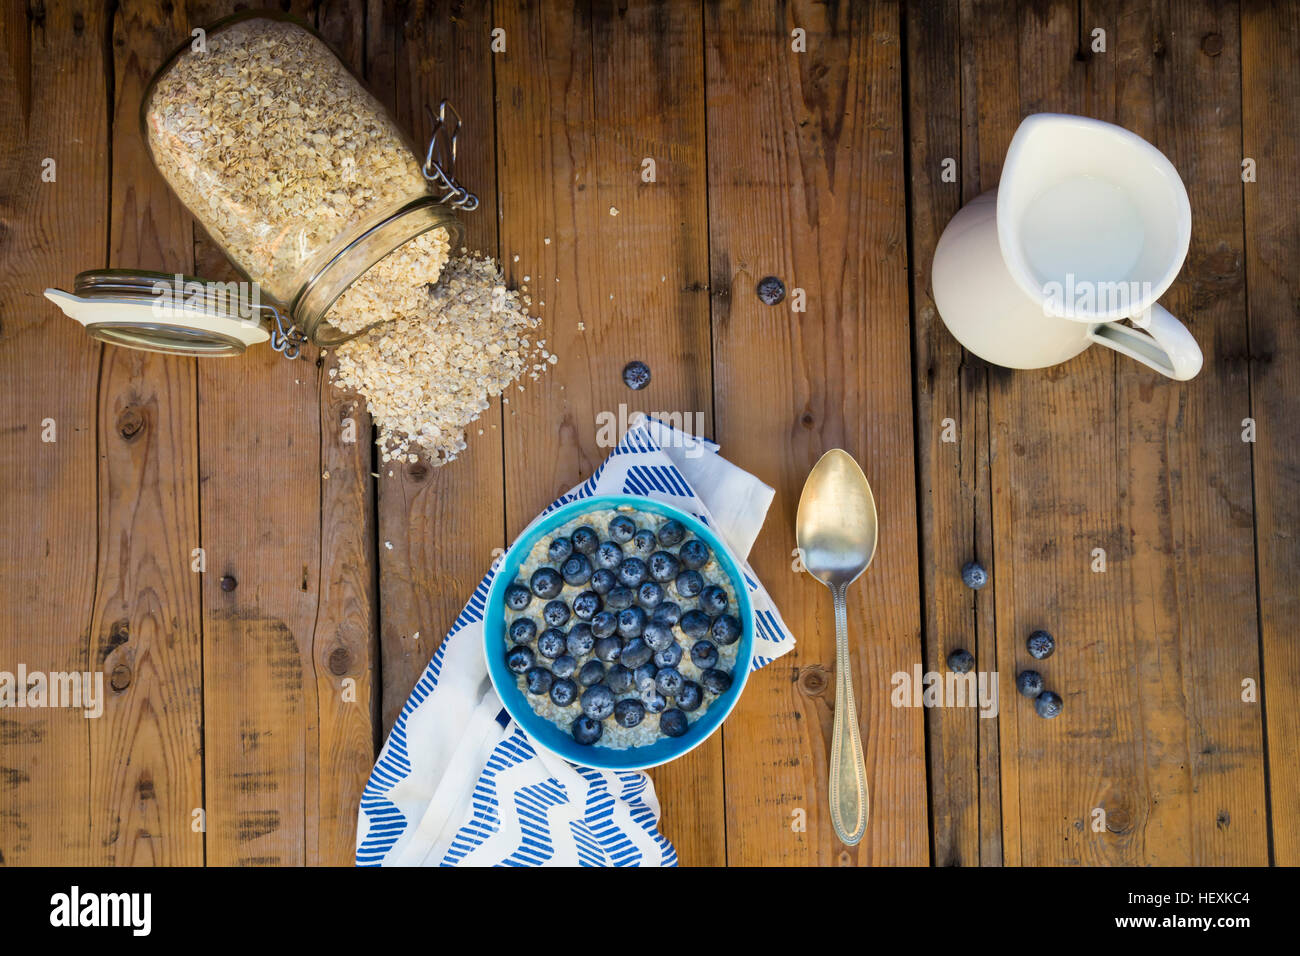 Bowl of overnight oats with blueberries on wood Stock Photo